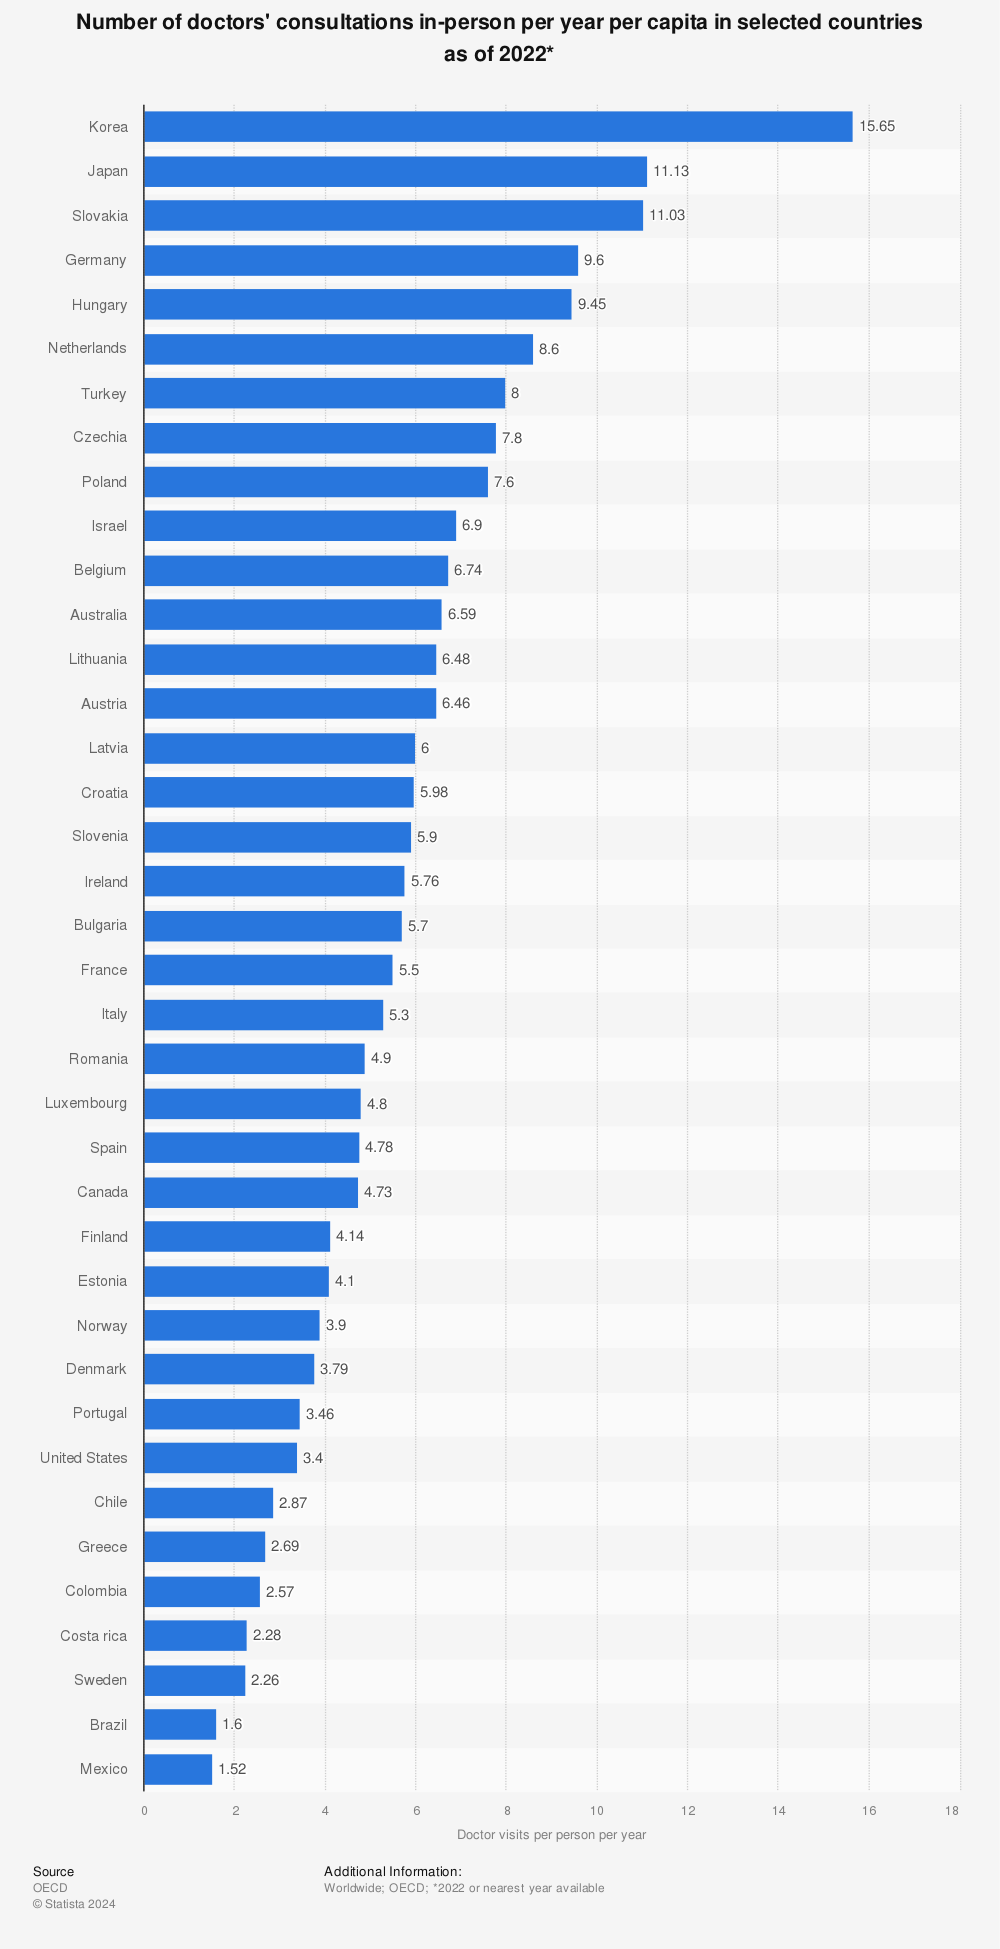 Statistic: Number of doctor visits per capita in selected countries as of 2021 | Statista